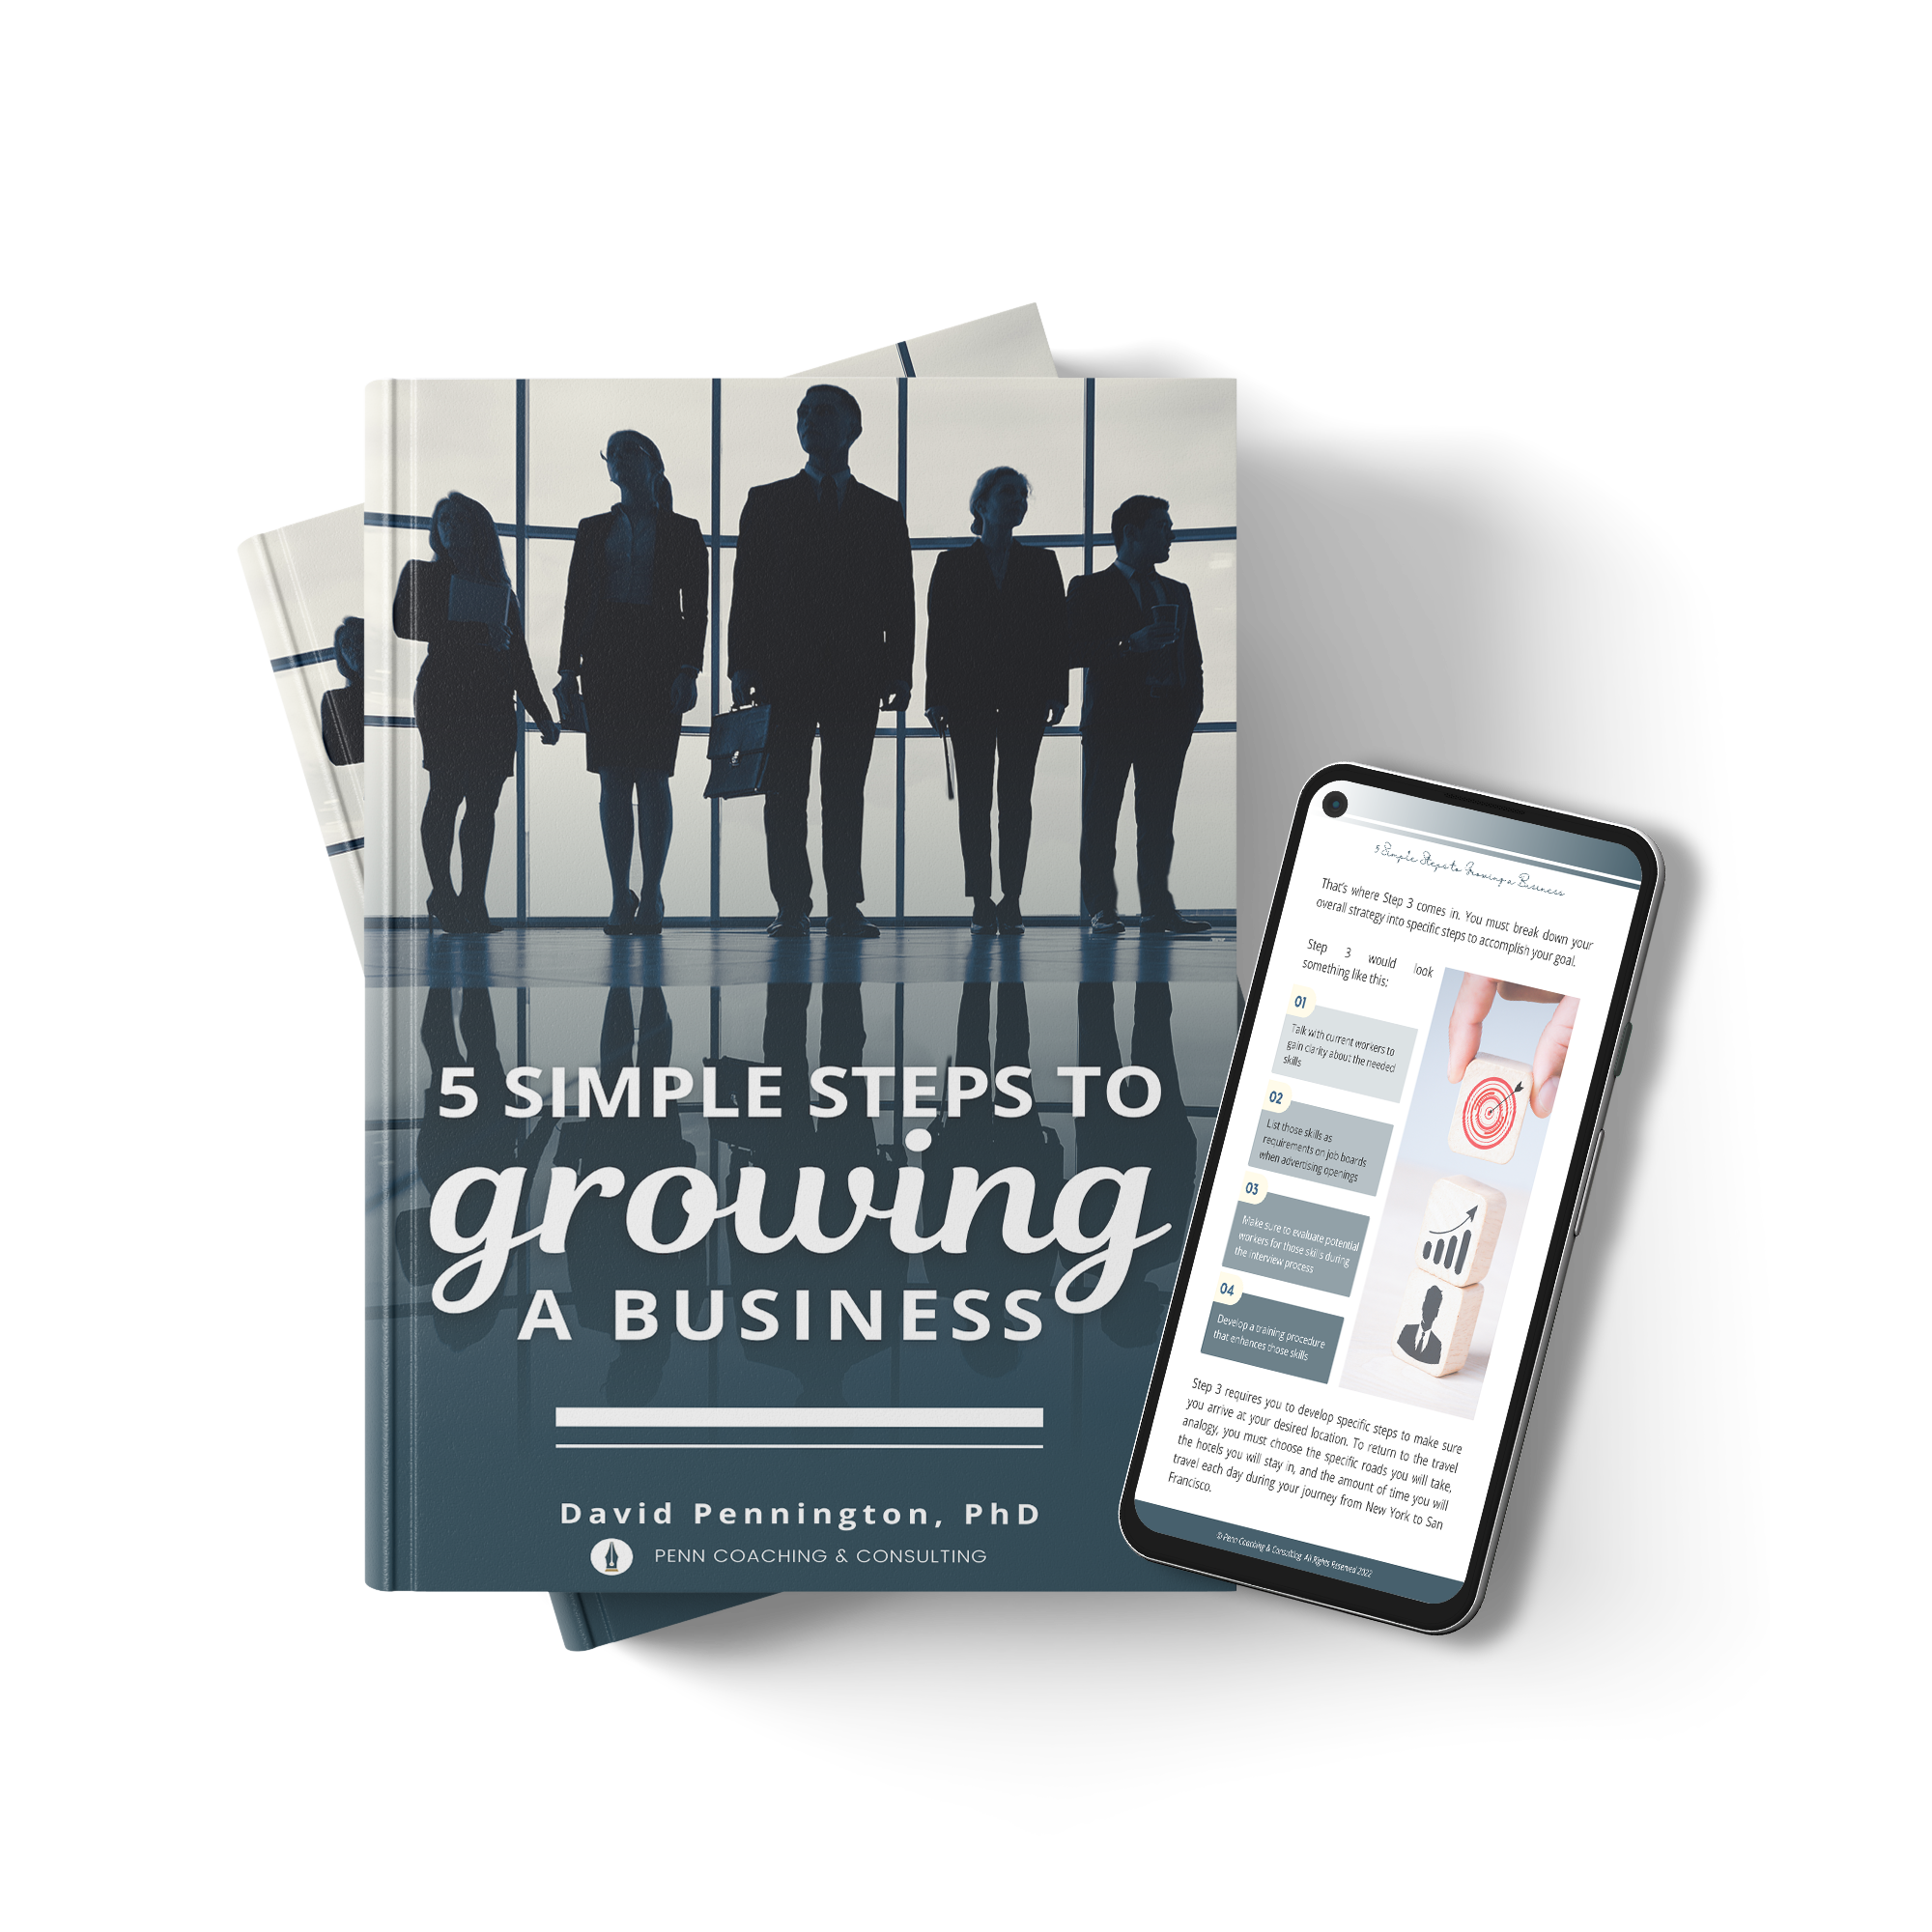 5 Simple Steps to Growing a Business